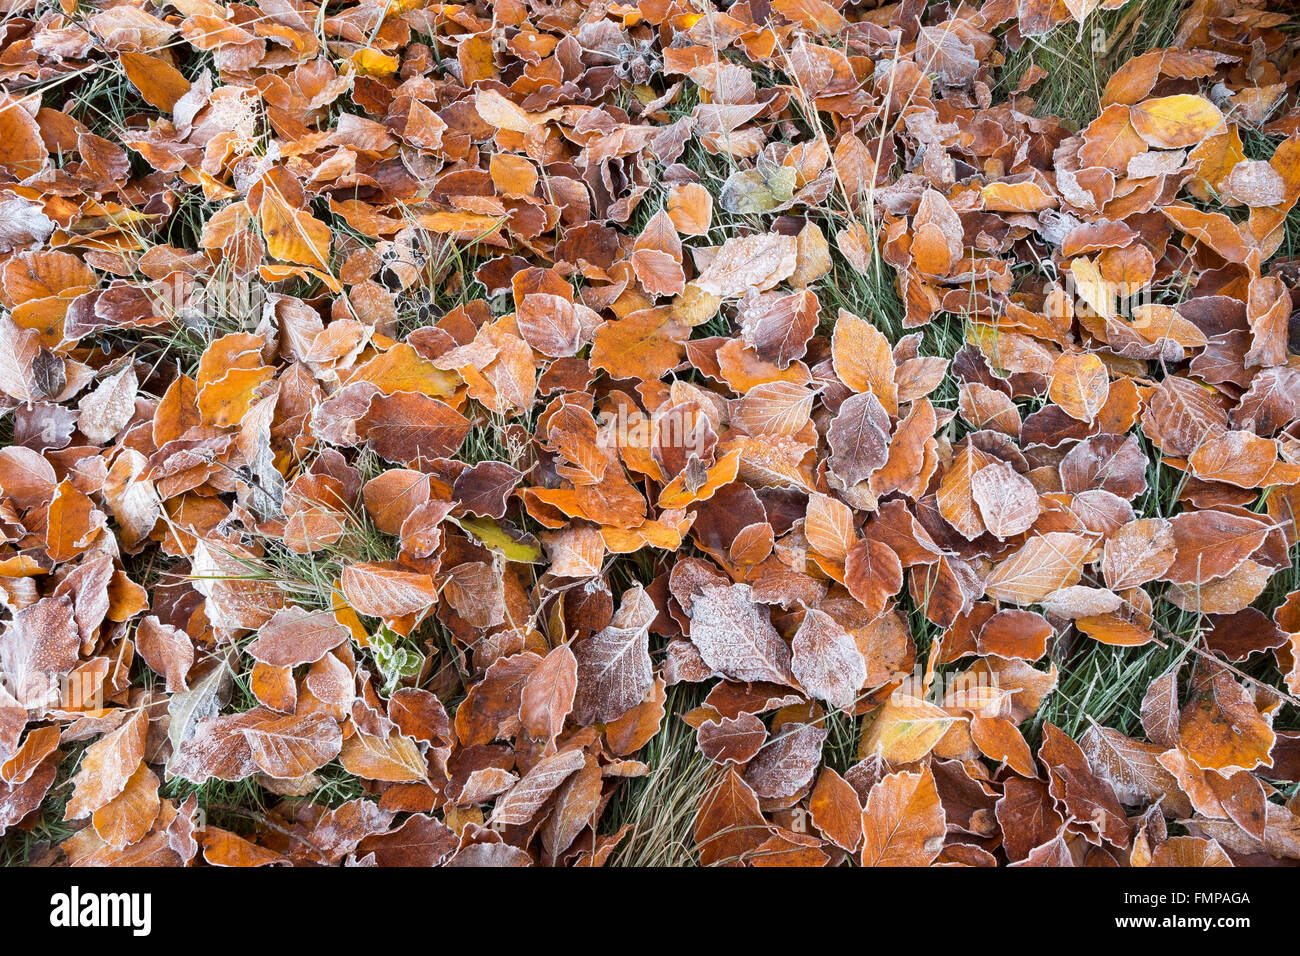 Autumn leaves, beech leaves with hoarfrost in a meadow, Icking, Upper Bavaria, Bavaria, Germany Stock Photo